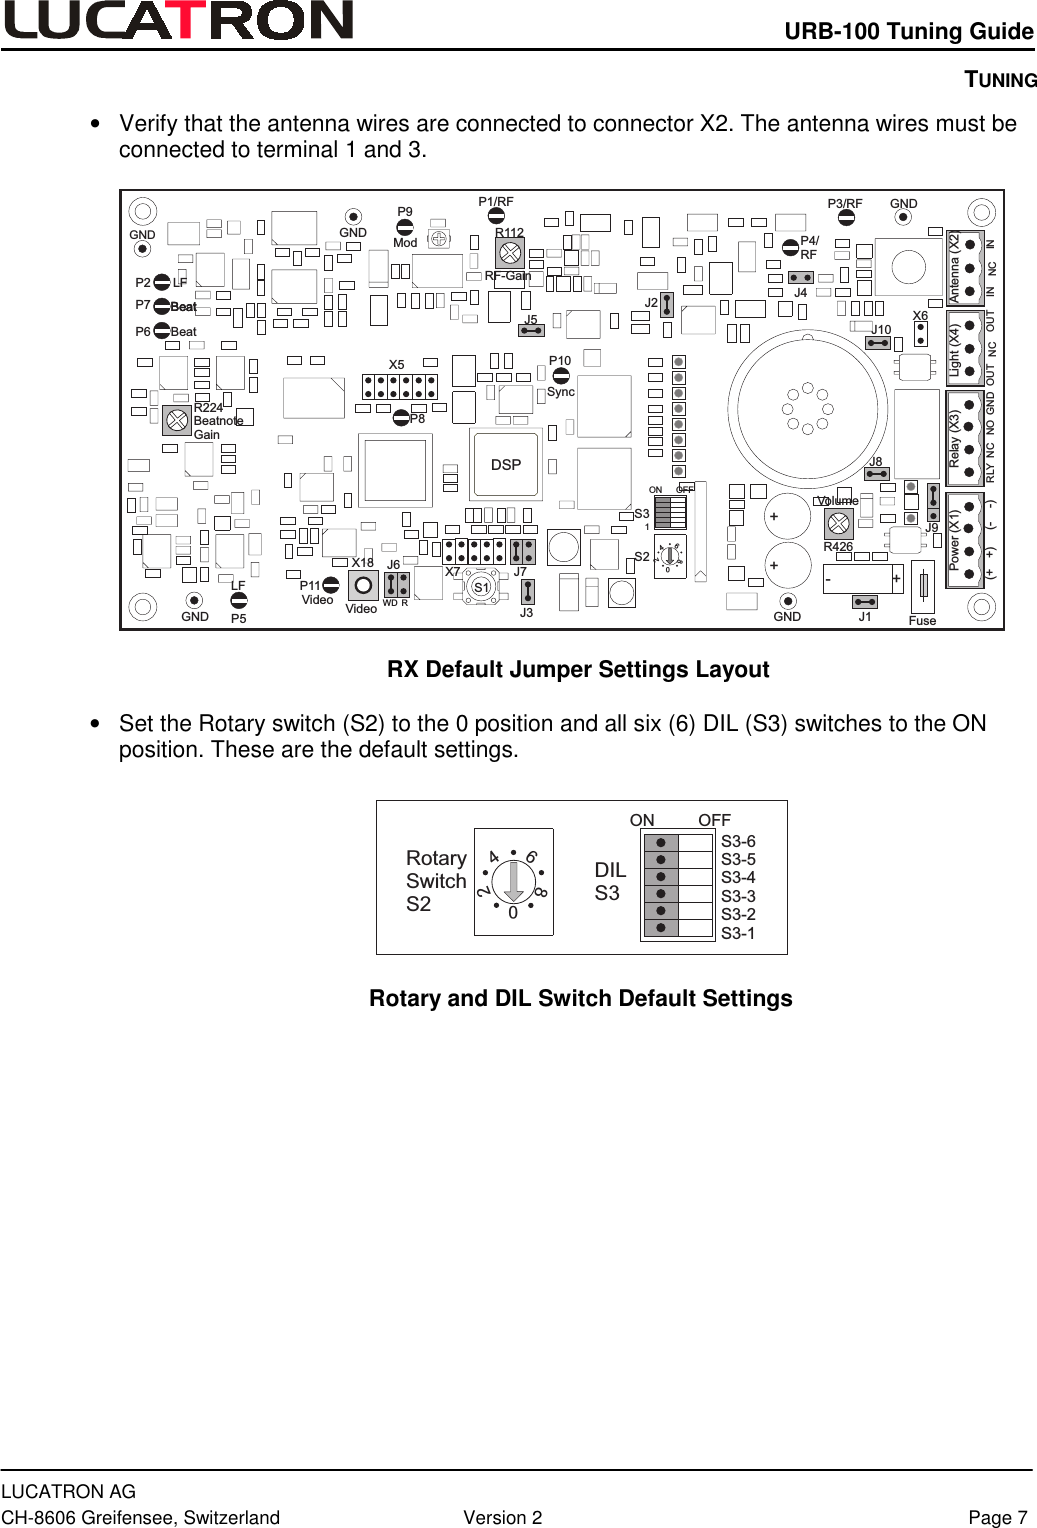    URB-100 Tuning Guide  LUCATRON AG CH-8606 Greifensee, Switzerland  Version 2  Page 7  •  Verify that the antenna wires are connected to connector X2. The antenna wires must be connected to terminal 1 and 3. ++-+GNDP3/RFP4/RFGNDGNDGNDGNDP1/RFP9P2P7P6R224P5P11R112P10P8S3S2ON OFFX18R426DSPJ10J4J9J8J1J3J2J5J7IN NC INOUT NC OUTPower (X1) Relay (X3) Light (X4) Antenna (X2)X6FuseS1X7X5(+ +) (- -)J6WD RRF-GainBeatBeatBeatBeatBeatnoteGainLFVideoVideoLFSyncModVolume046281RLY NC NO GND  RX Default Jumper Settings Layout •  Set the Rotary switch (S2) to the 0 position and all six (6) DIL (S3) switches to the ON position. These are the default settings.  04628RotarySwitchS2DILS3ON OFFS3-6S3-5S3-4S3-3S3-2S3-1  Rotary and DIL Switch Default Settings    TUNING